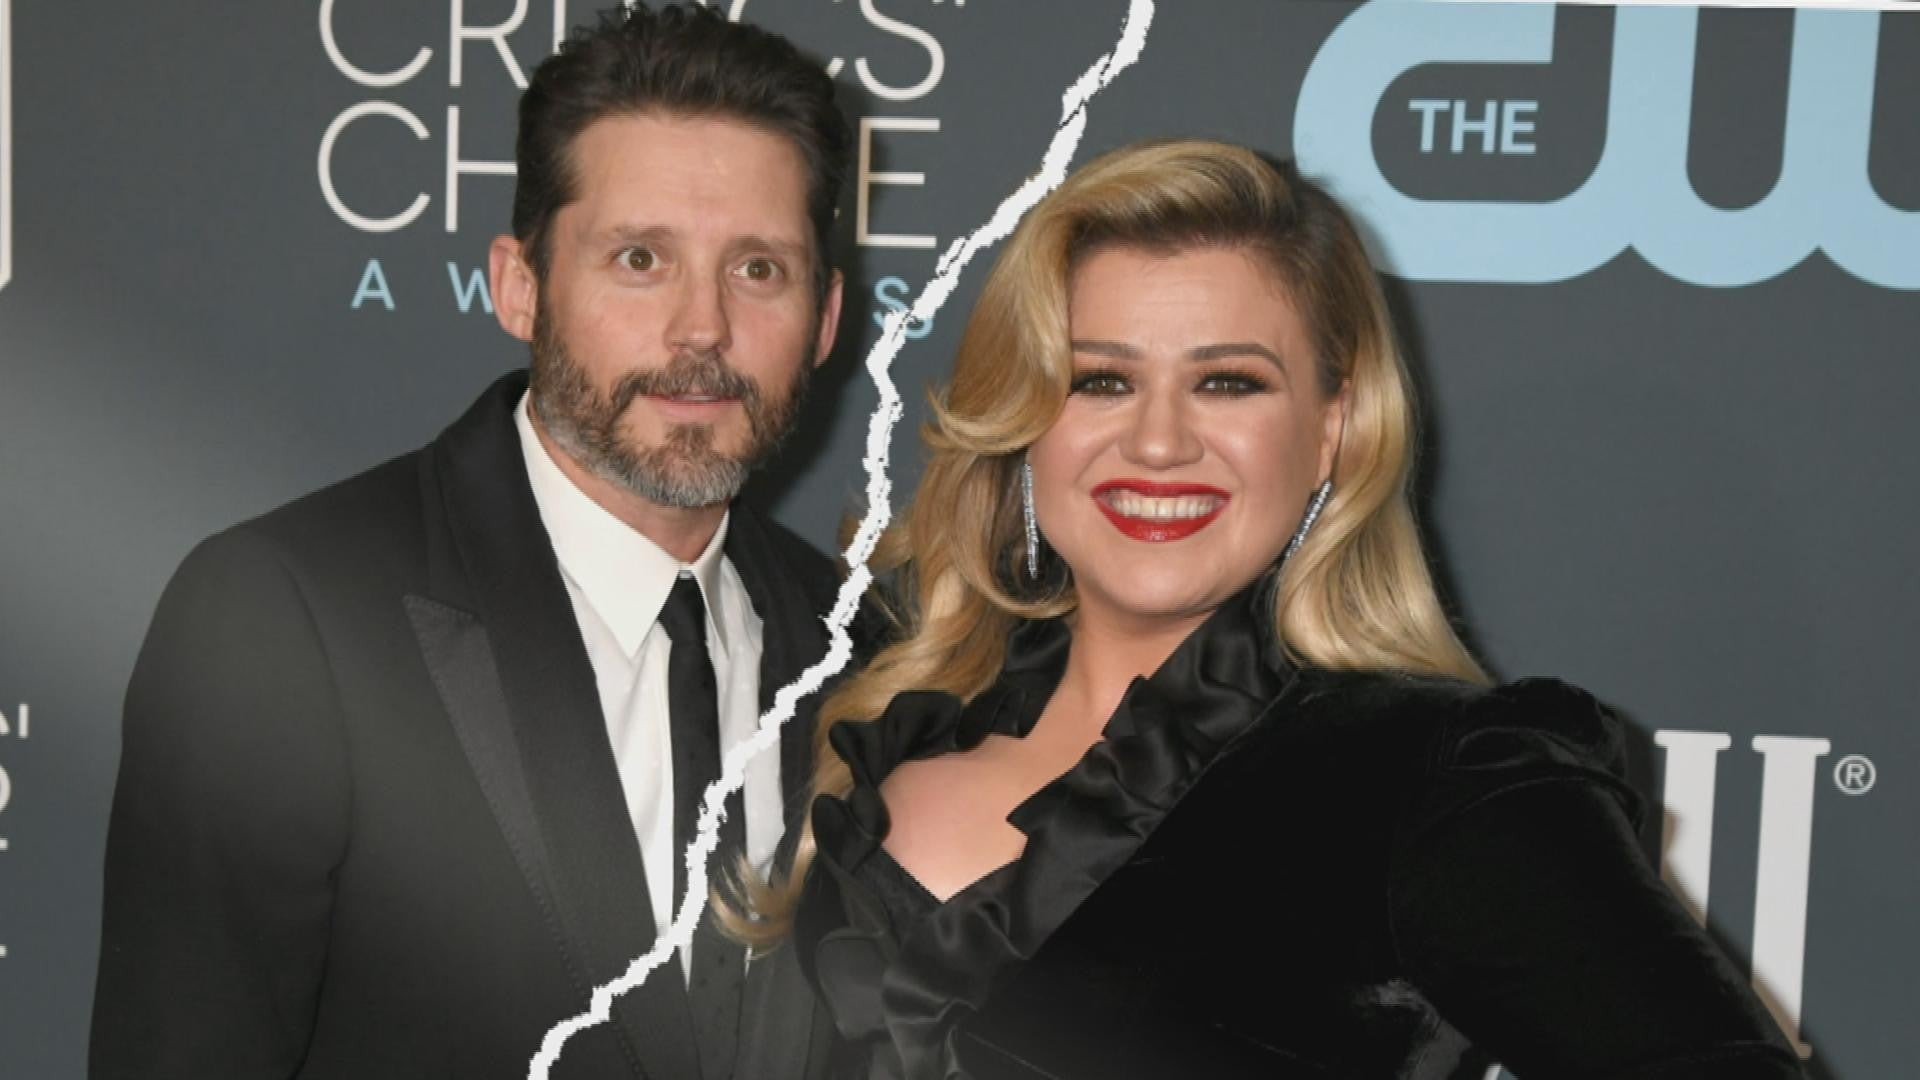 Singer, Kelly Clarkson ordered to pay her estranged husband Brandon Blackstock nearly $200,000 in spousal and child support following split